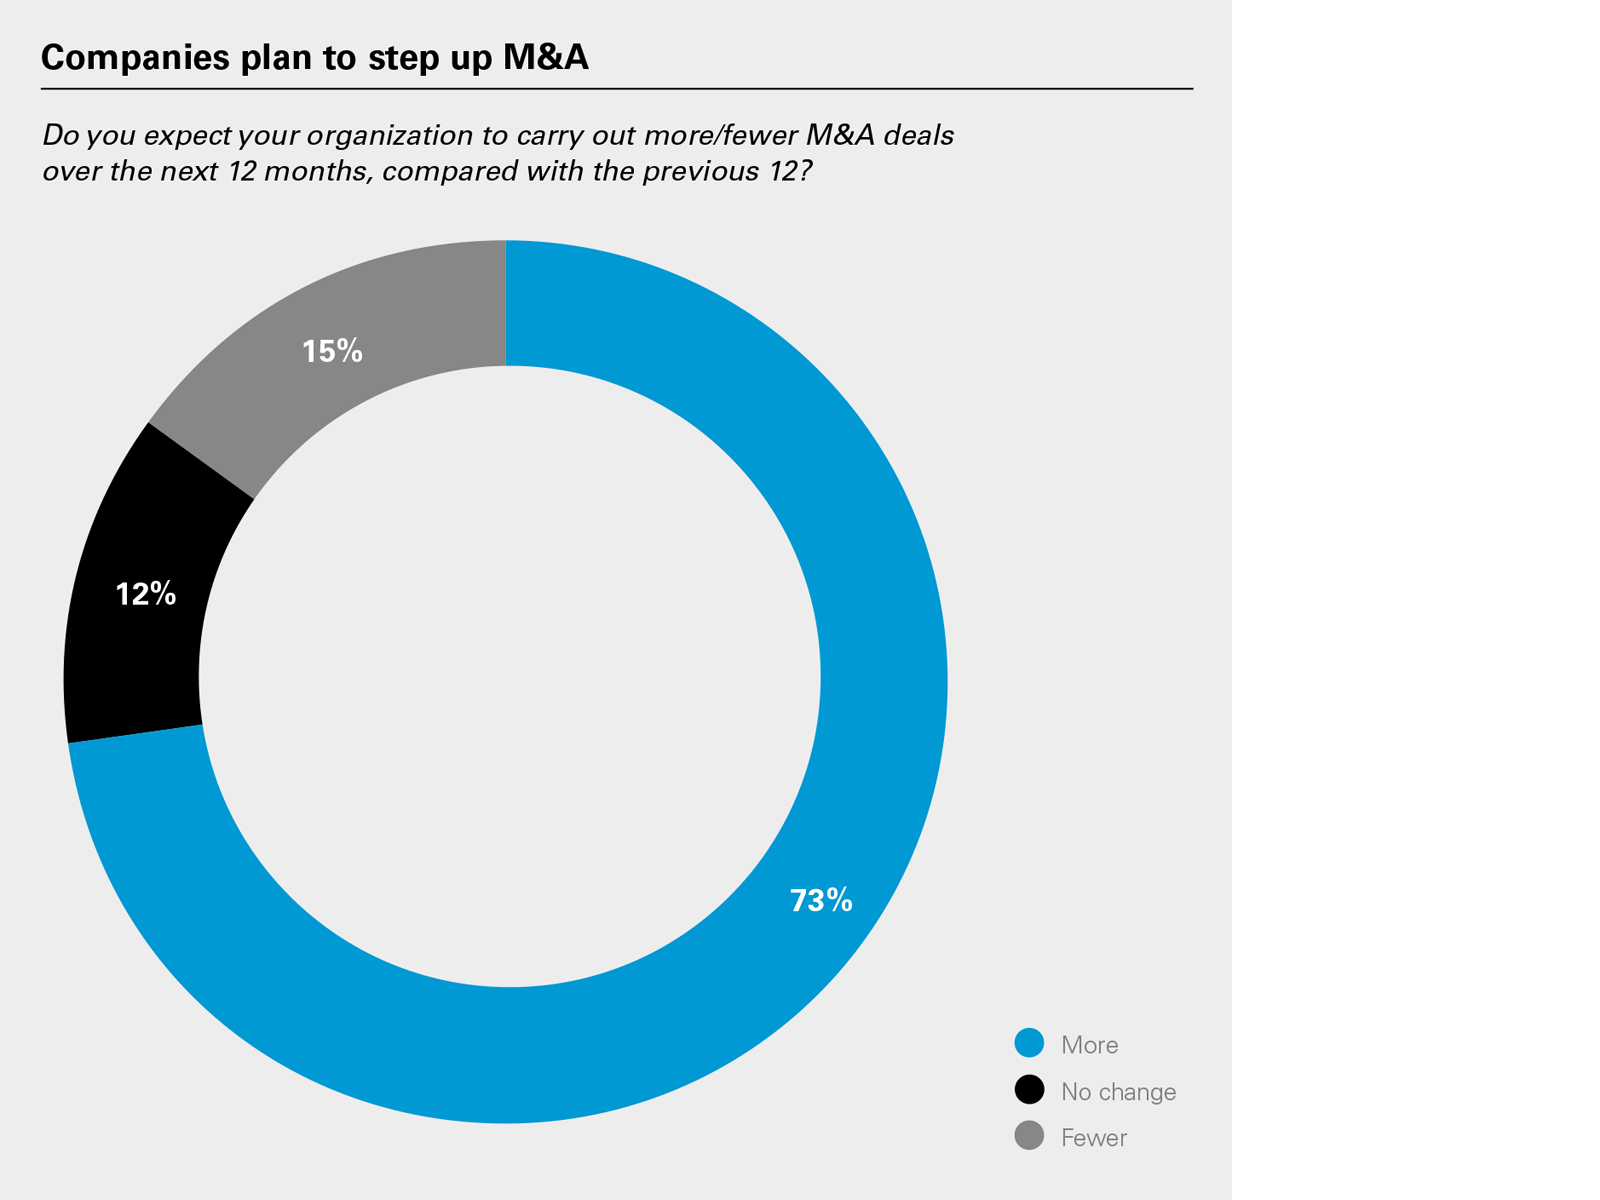 Companies plan to step up M&A